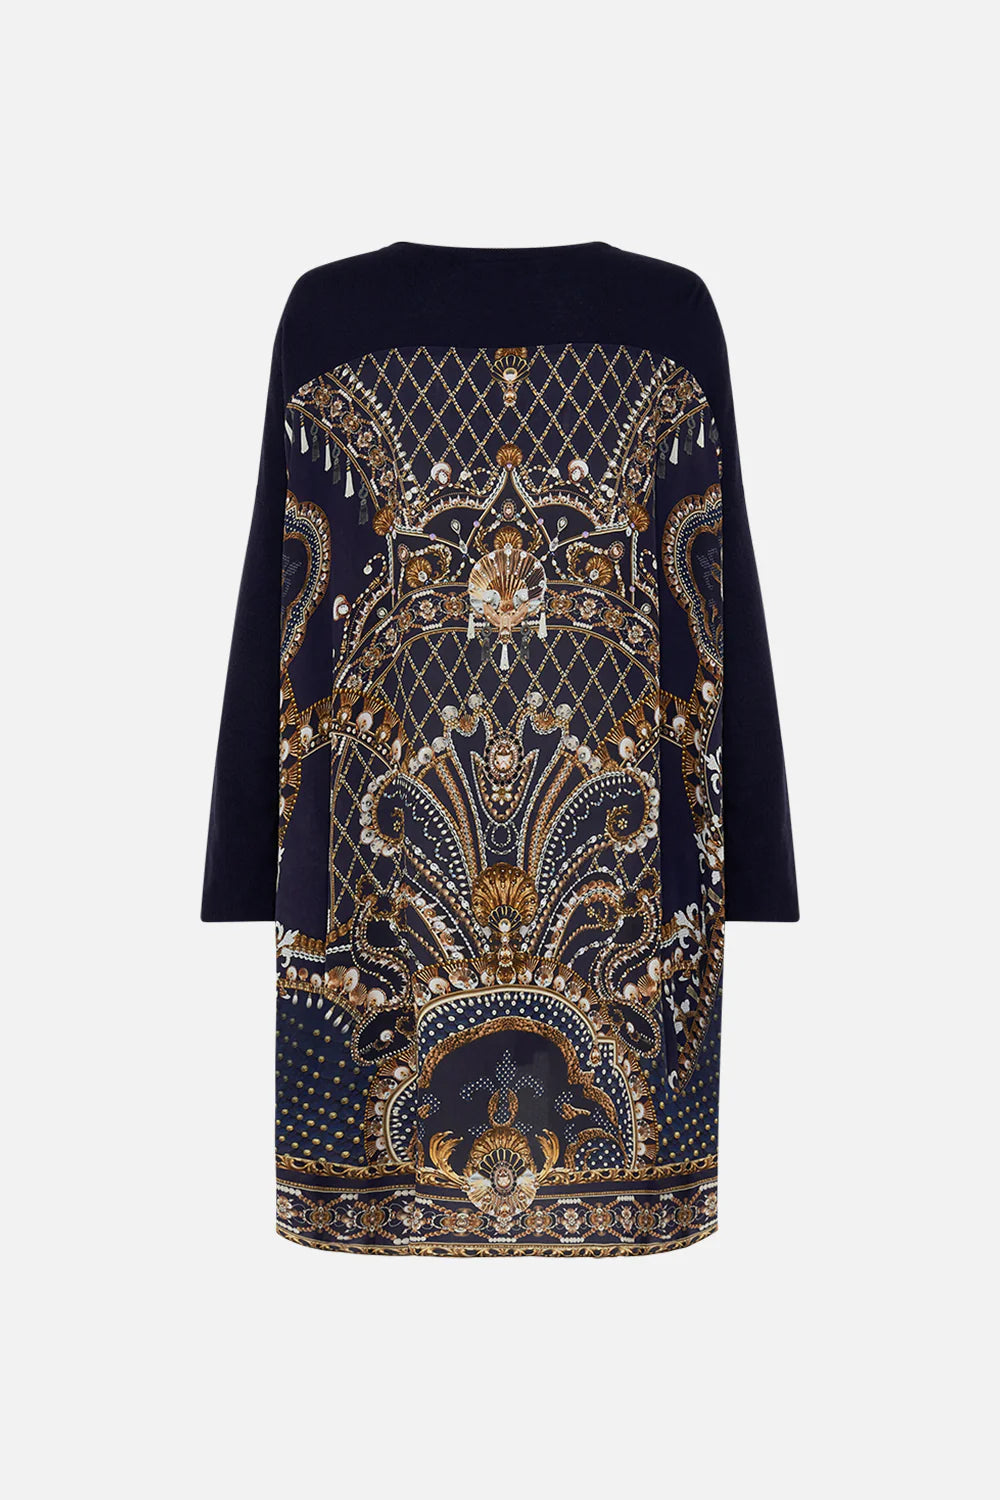 Long sleeve jumper with print back, dance with the duke